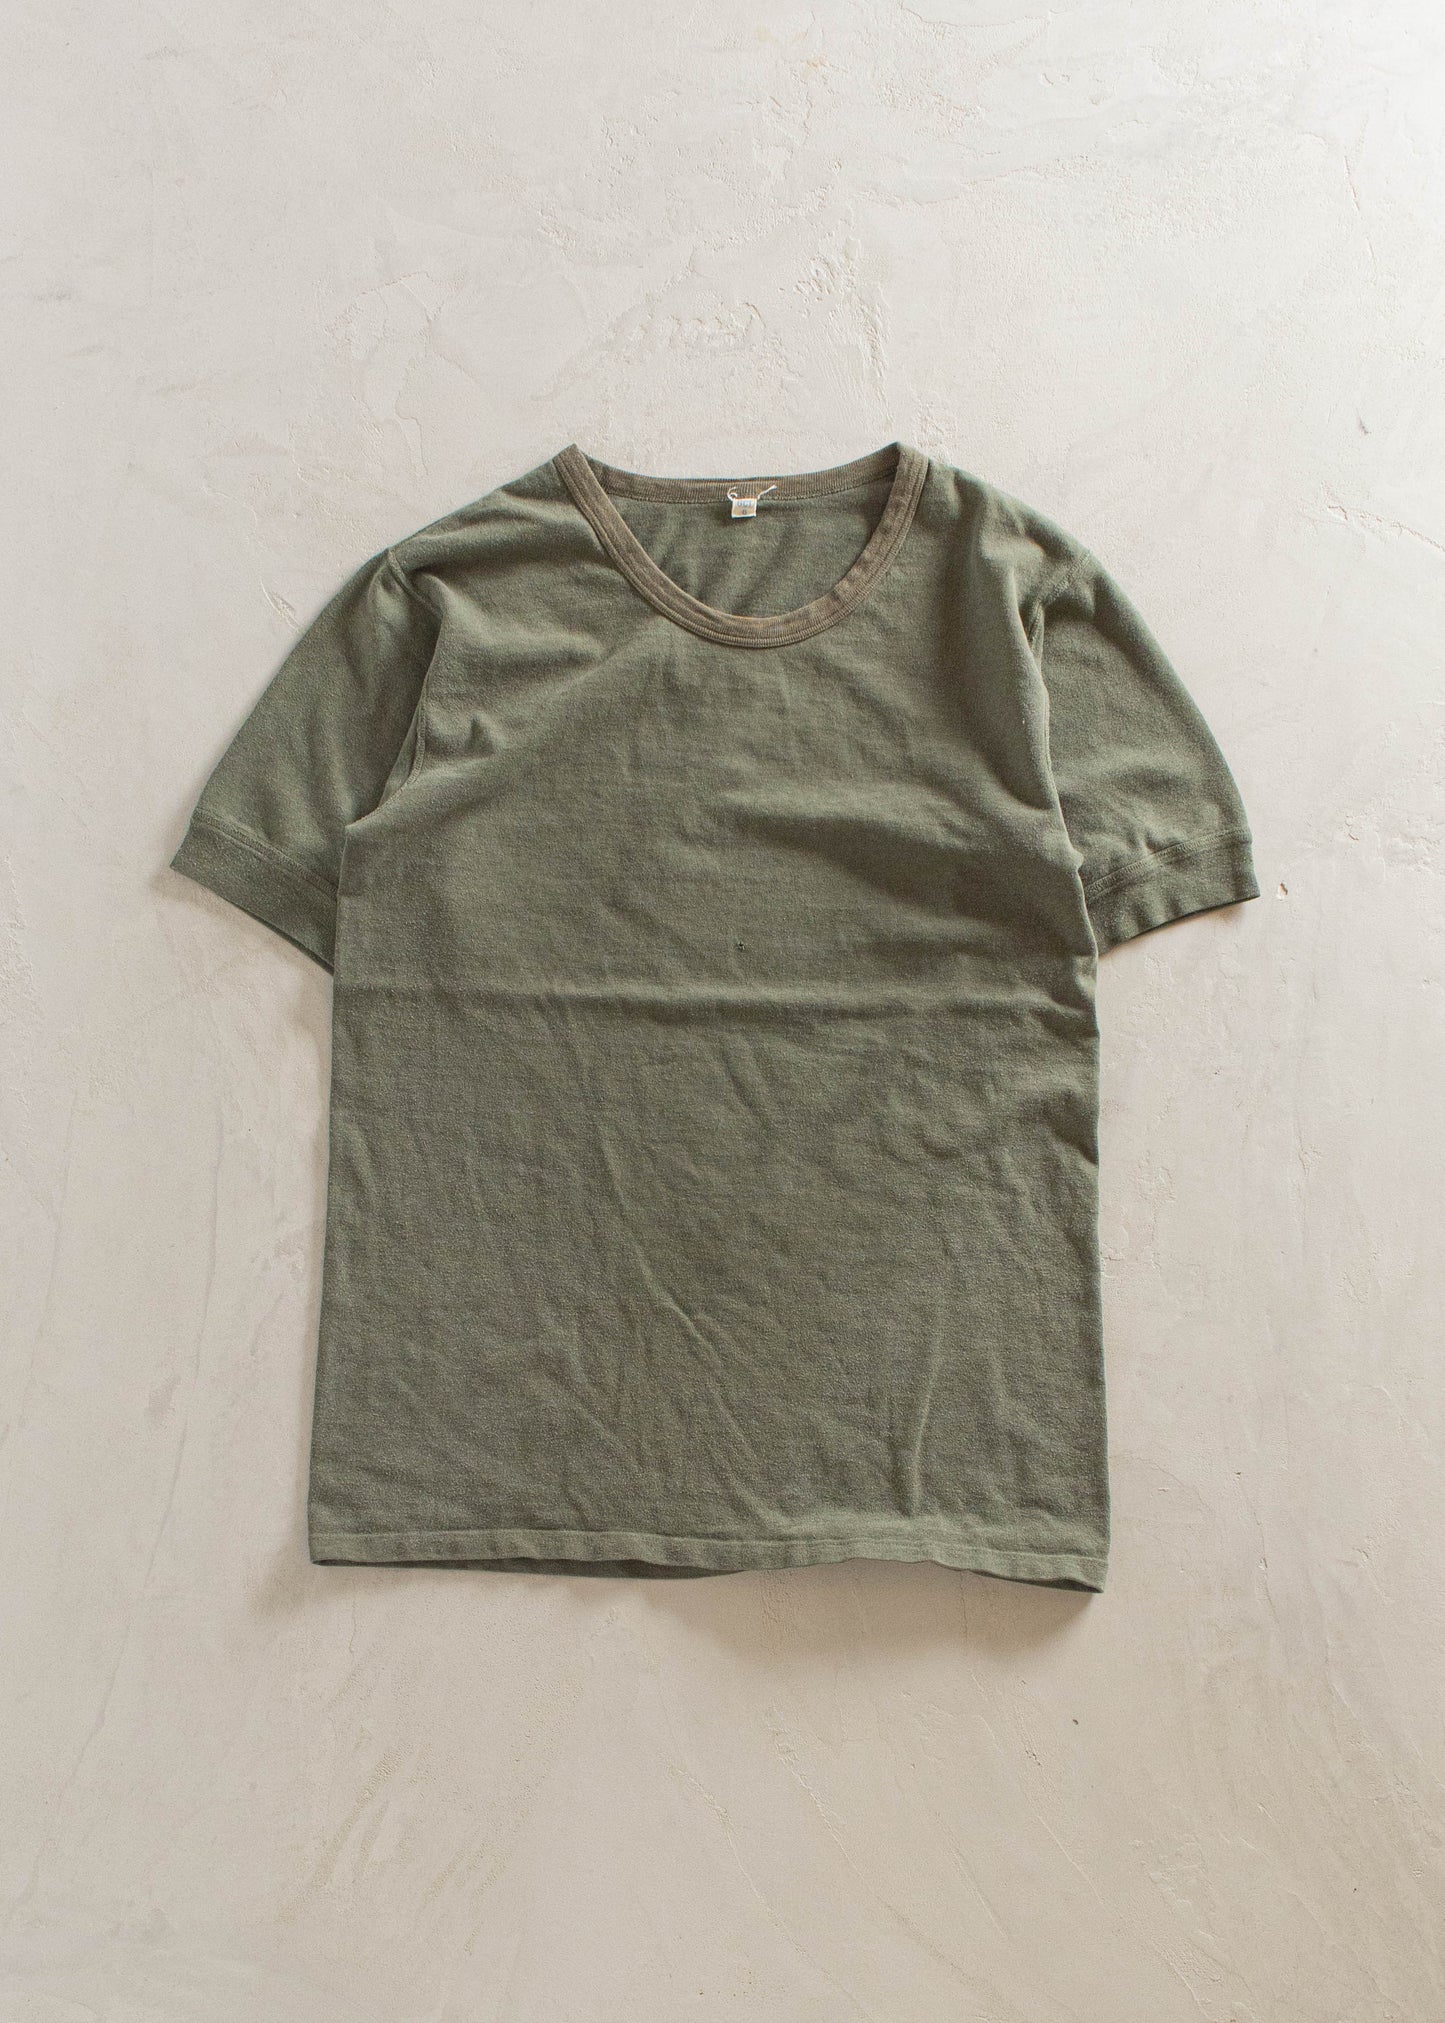 1980s Military T-Shirt Size S/M